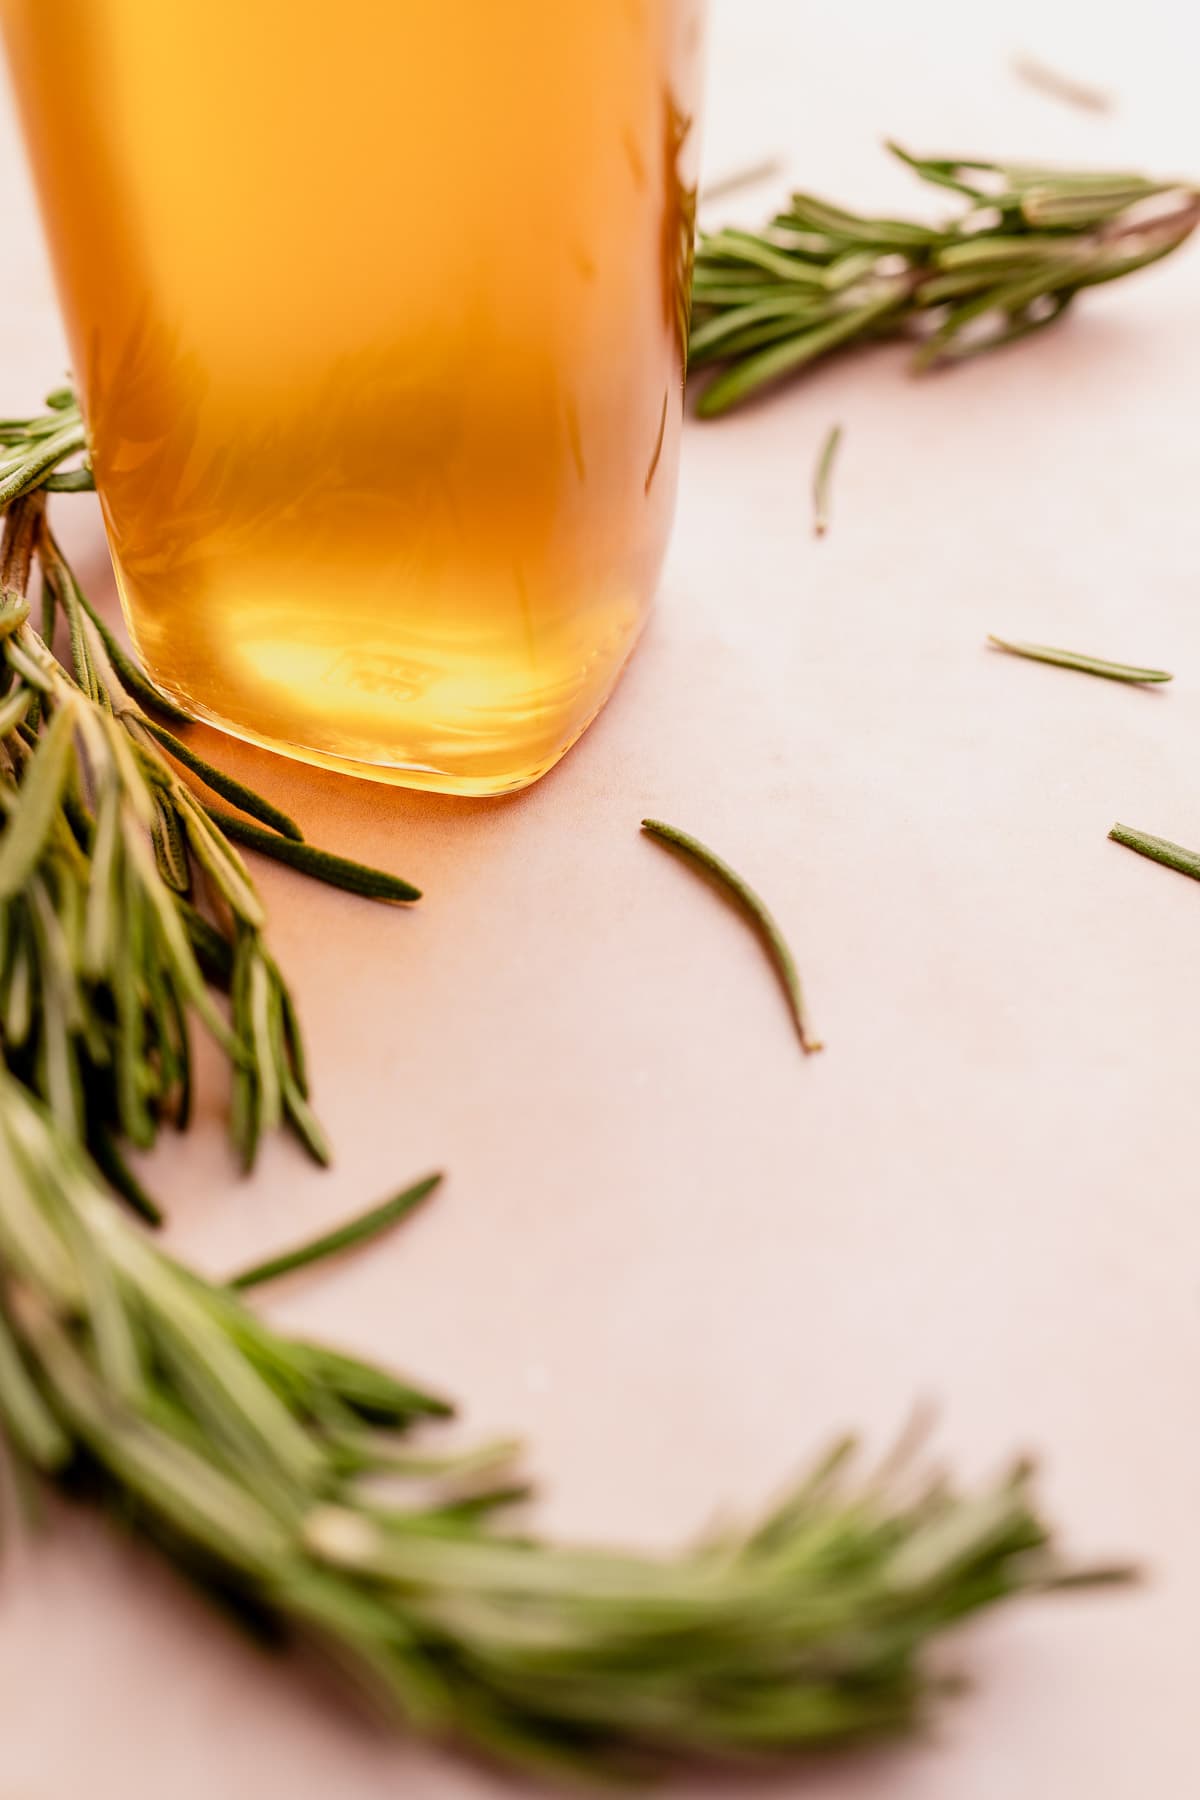 A glass of rosemary-infused honey.